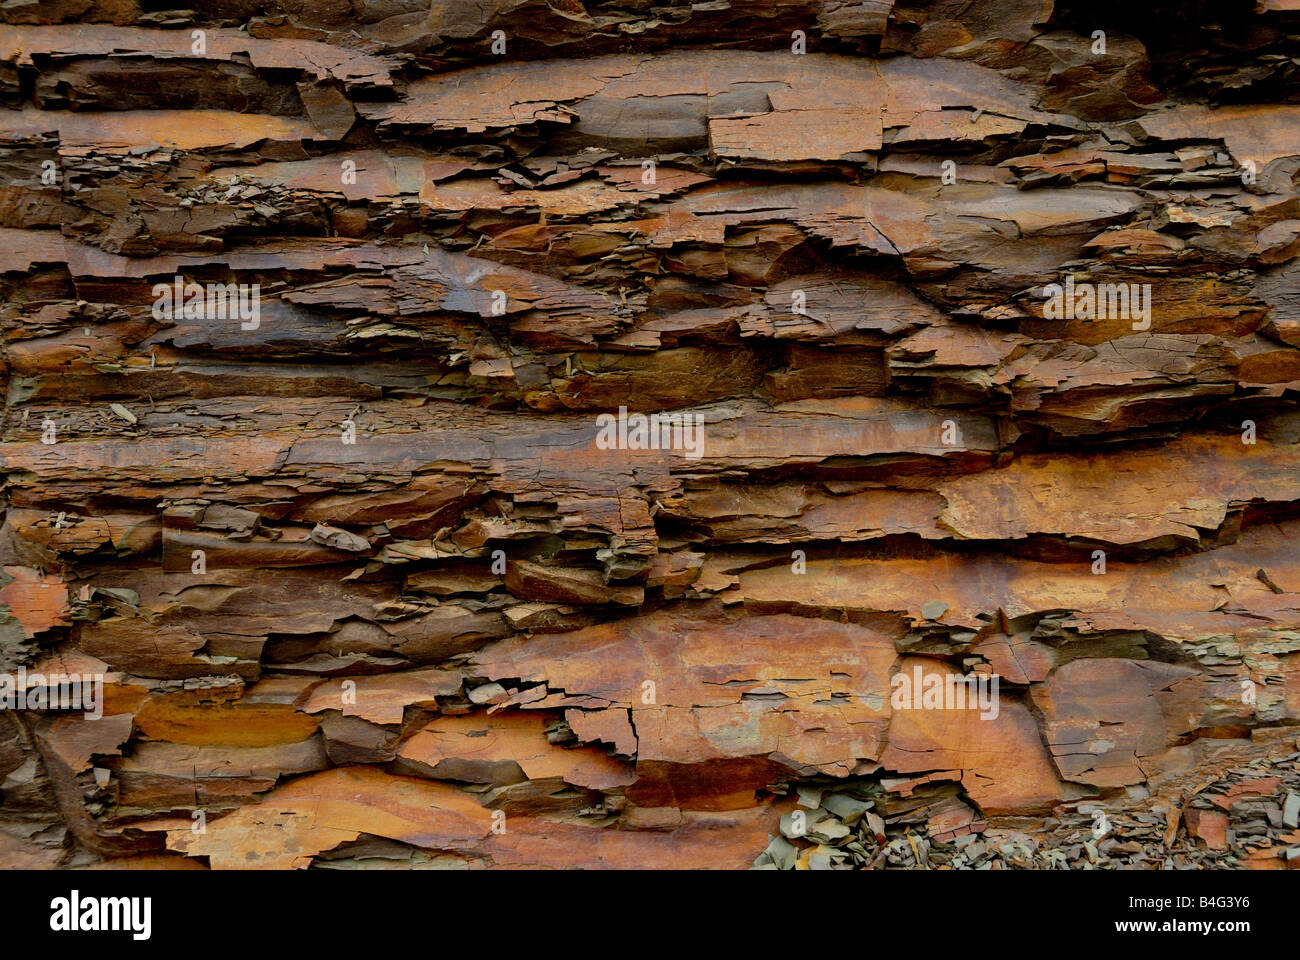 Shale rock at a construction site provides an interesting texture Stock Photo